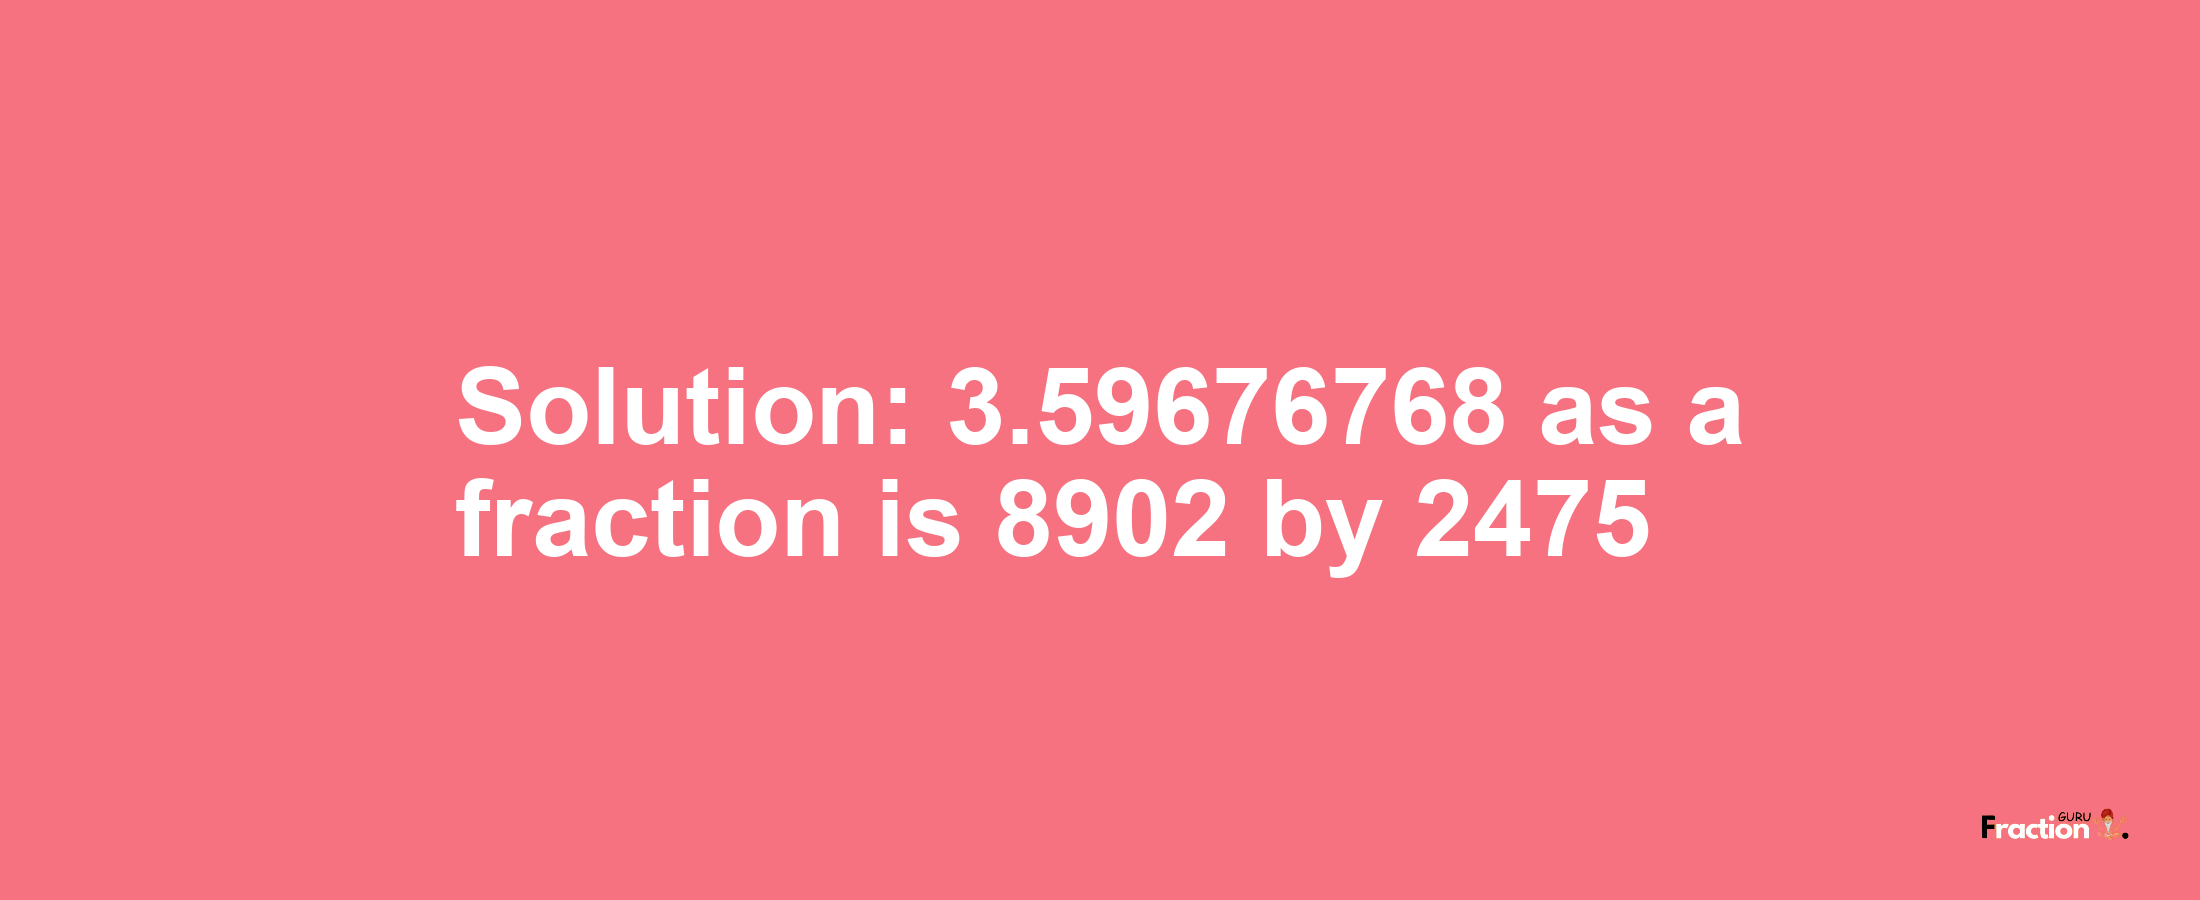 Solution:3.59676768 as a fraction is 8902/2475